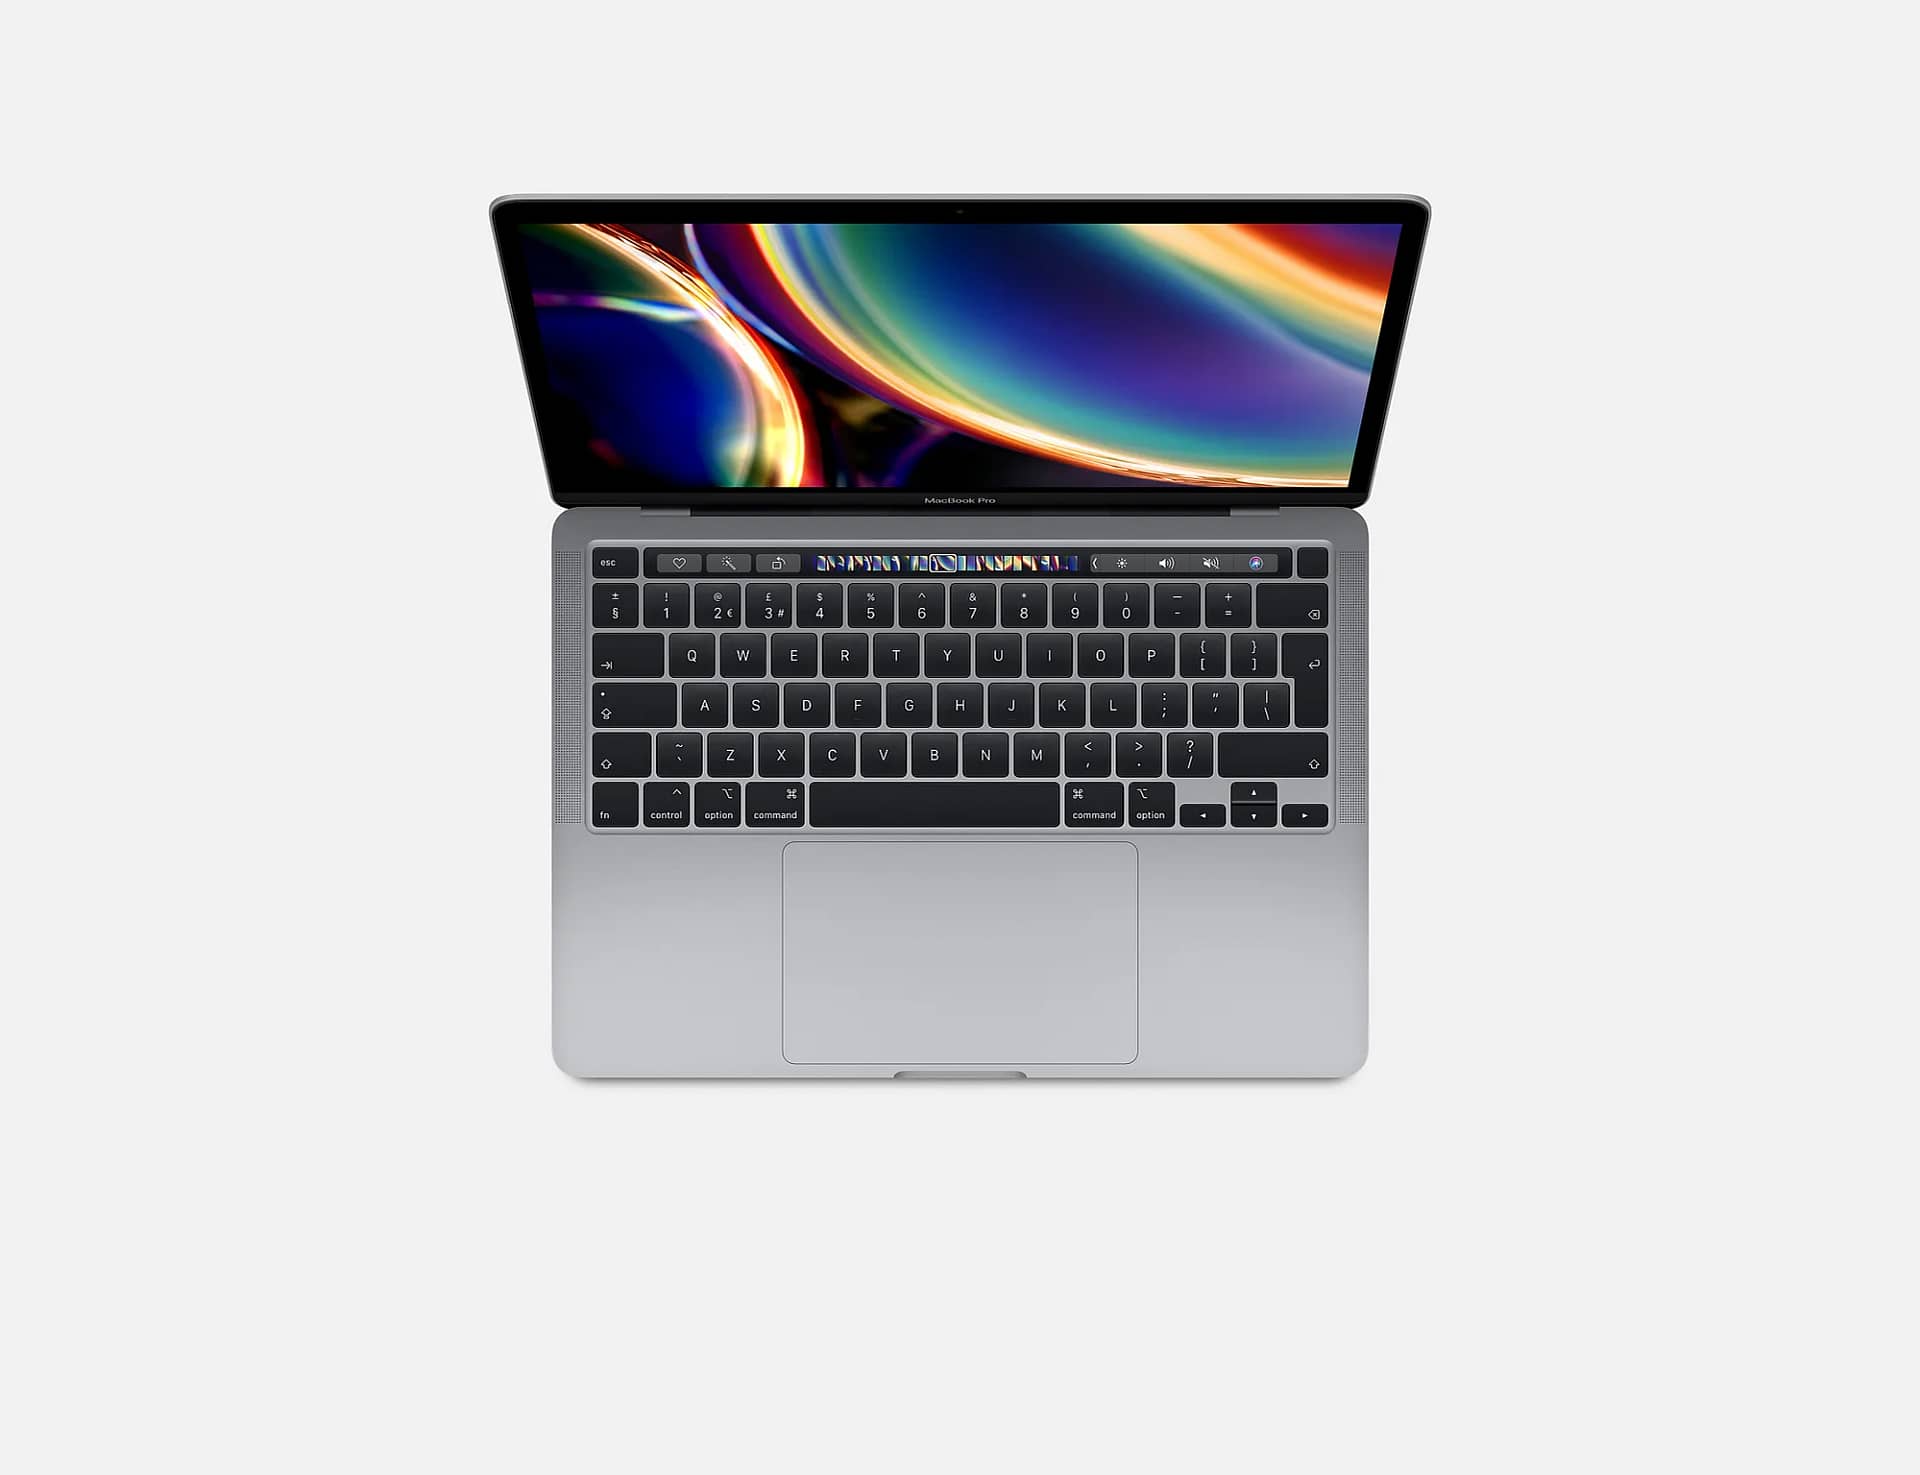 Apple MacBook Pro 13 inch 2019 Two Thunderbolt 3 ports Technical Specifications